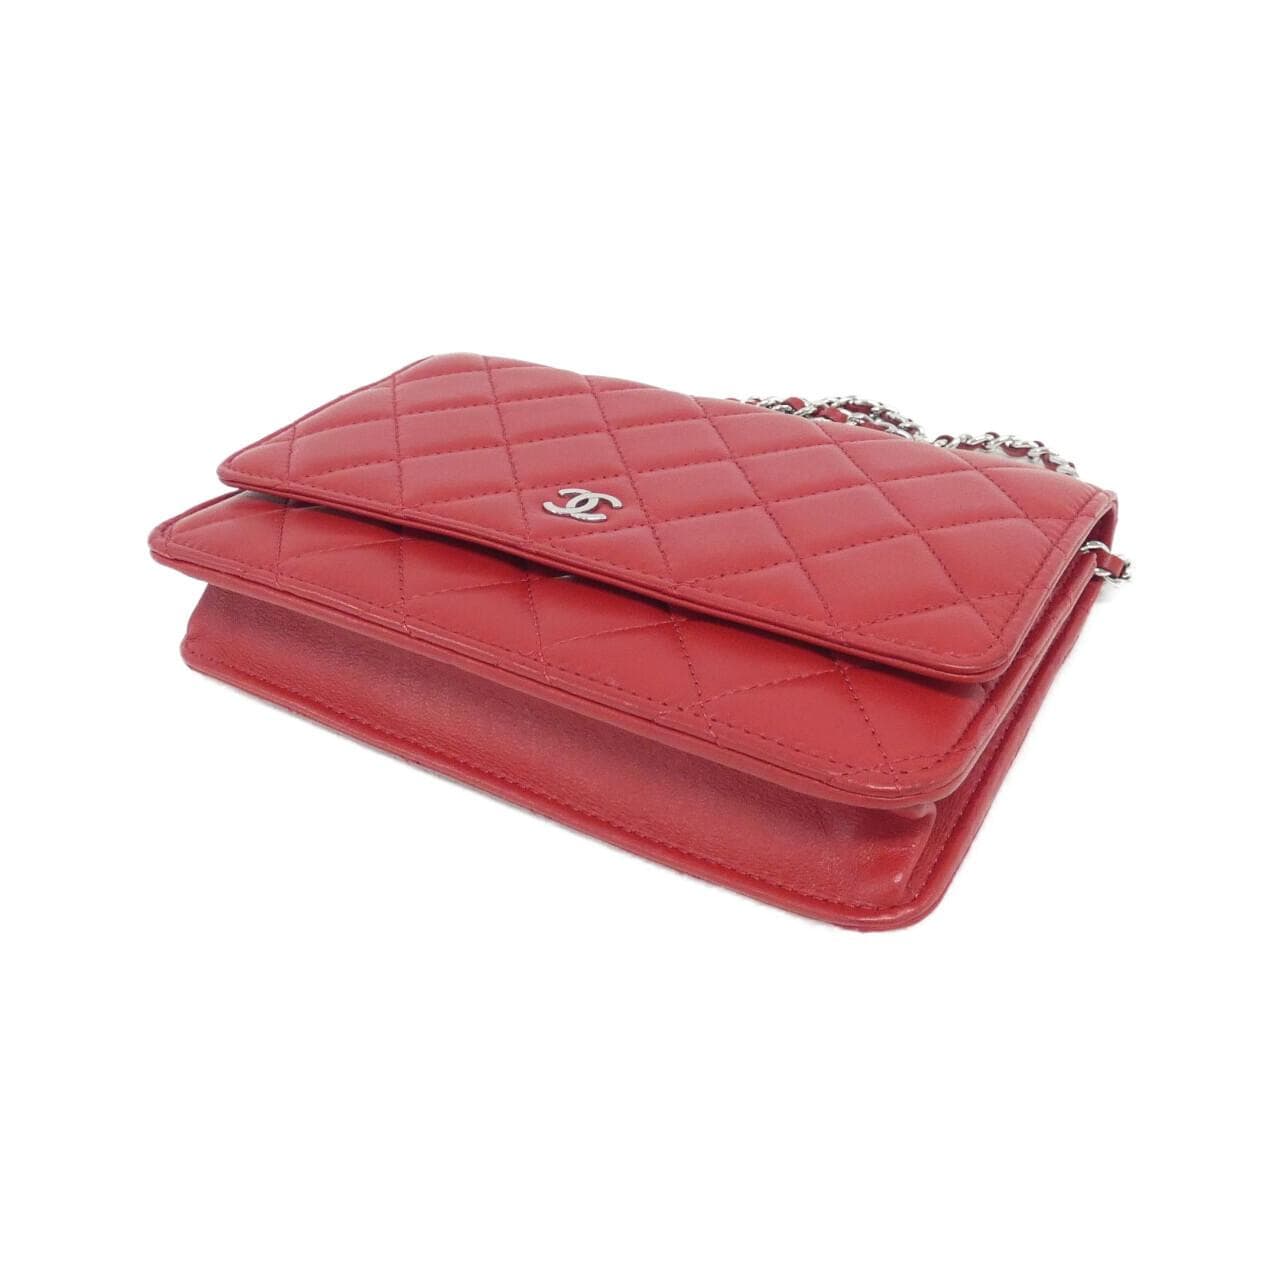 CHANEL Timeless Classic Line AP0250 Chain Wallet